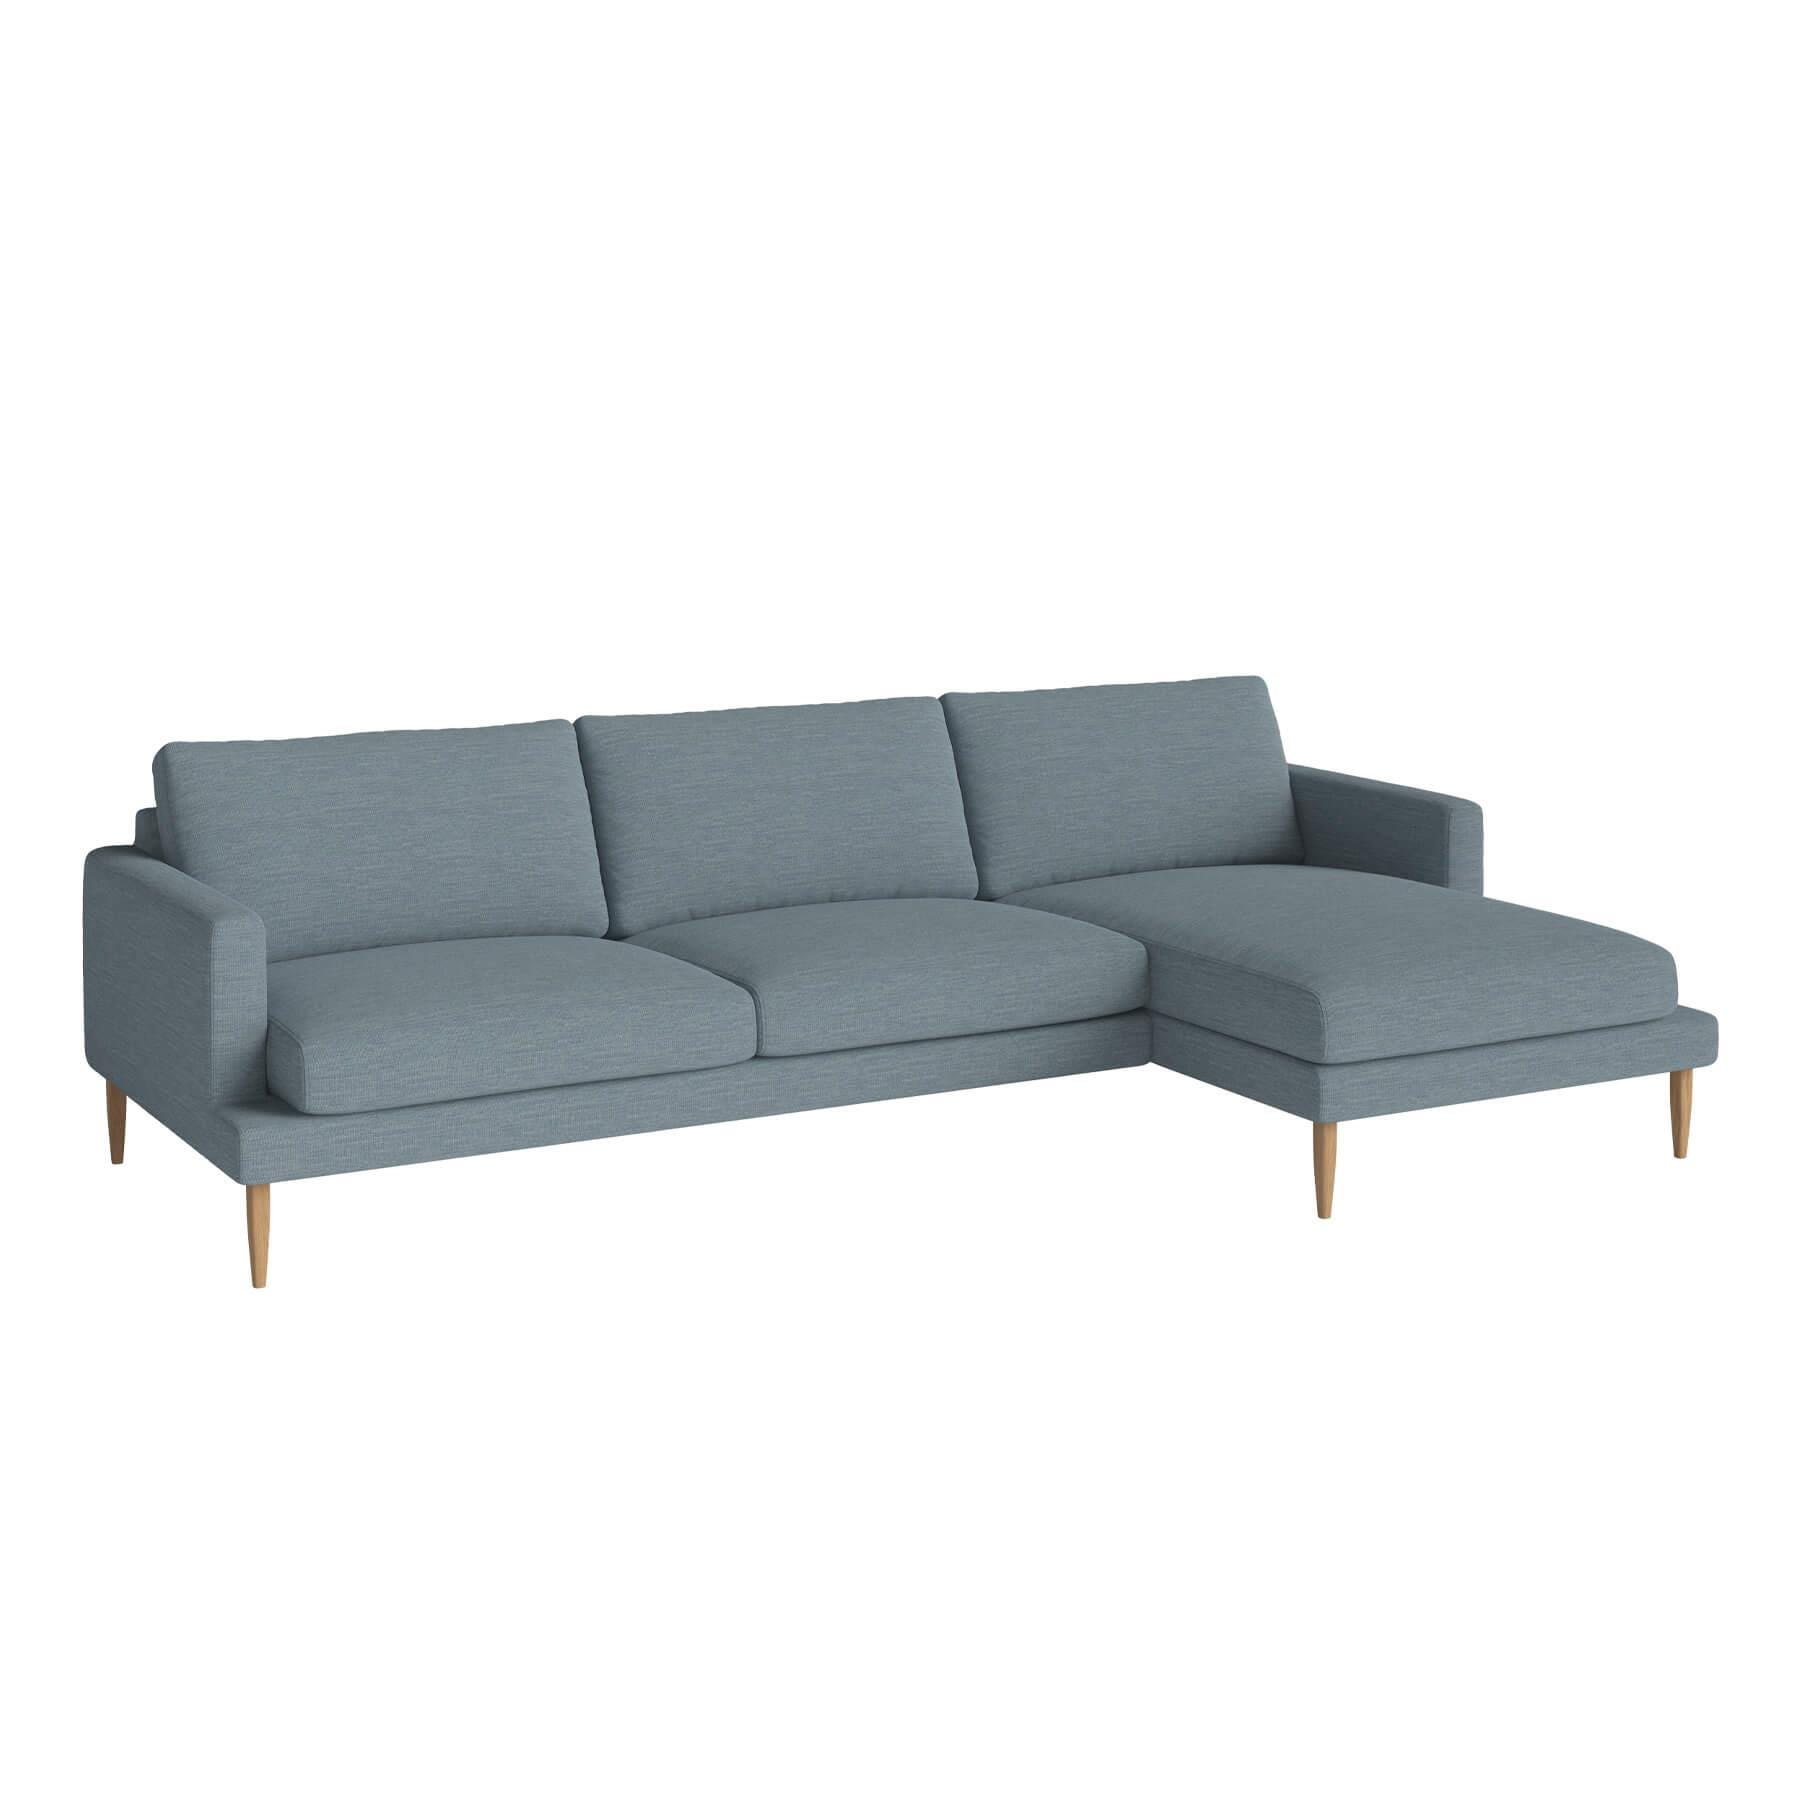 Bolia Veneda Sofa 35 Seater Sofa With Chaise Longue Oiled Oak Laine Light Blue Right Blue Designer Furniture From Holloways Of Ludlow